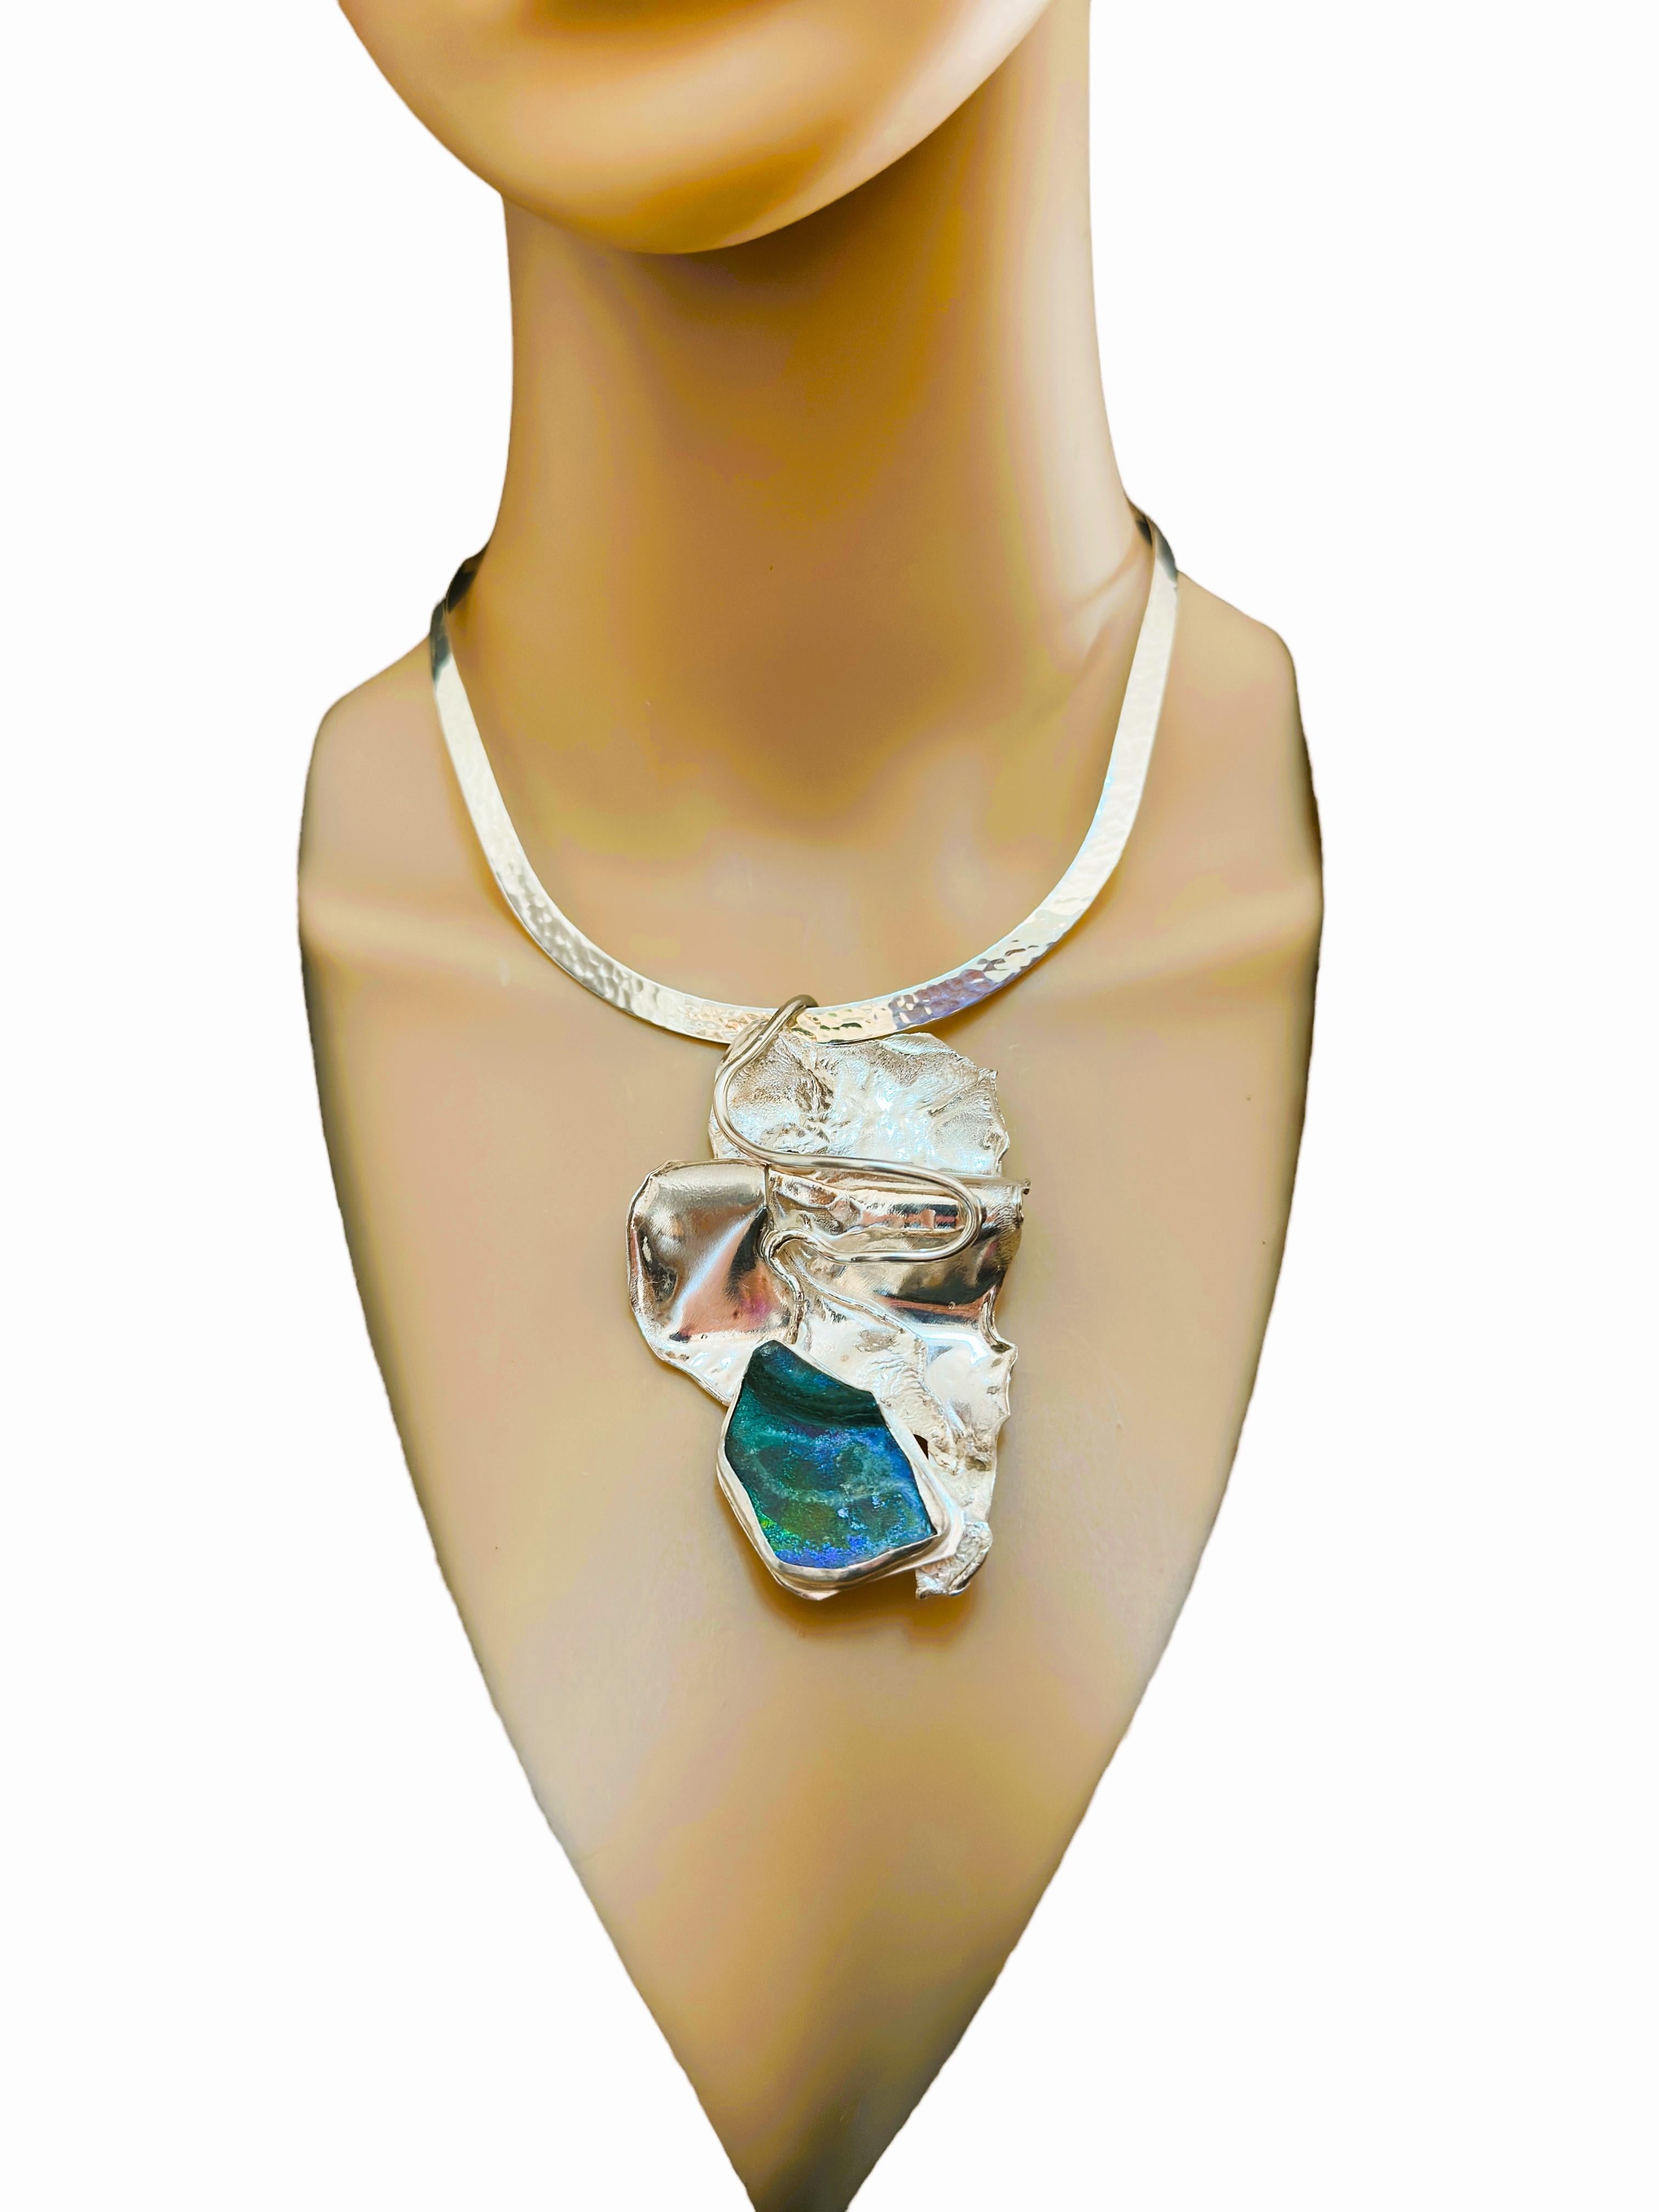 Jackie Cohen Jewelry Designs Features Handcrafted Sterling Silver Combined With Natural Stones Such As Fragments Of 2000 Year Old Roman Glass,. The Designs Are Distinct In Their Sculptural Style, Their Flowing Shape, And Their Organic Finish. The